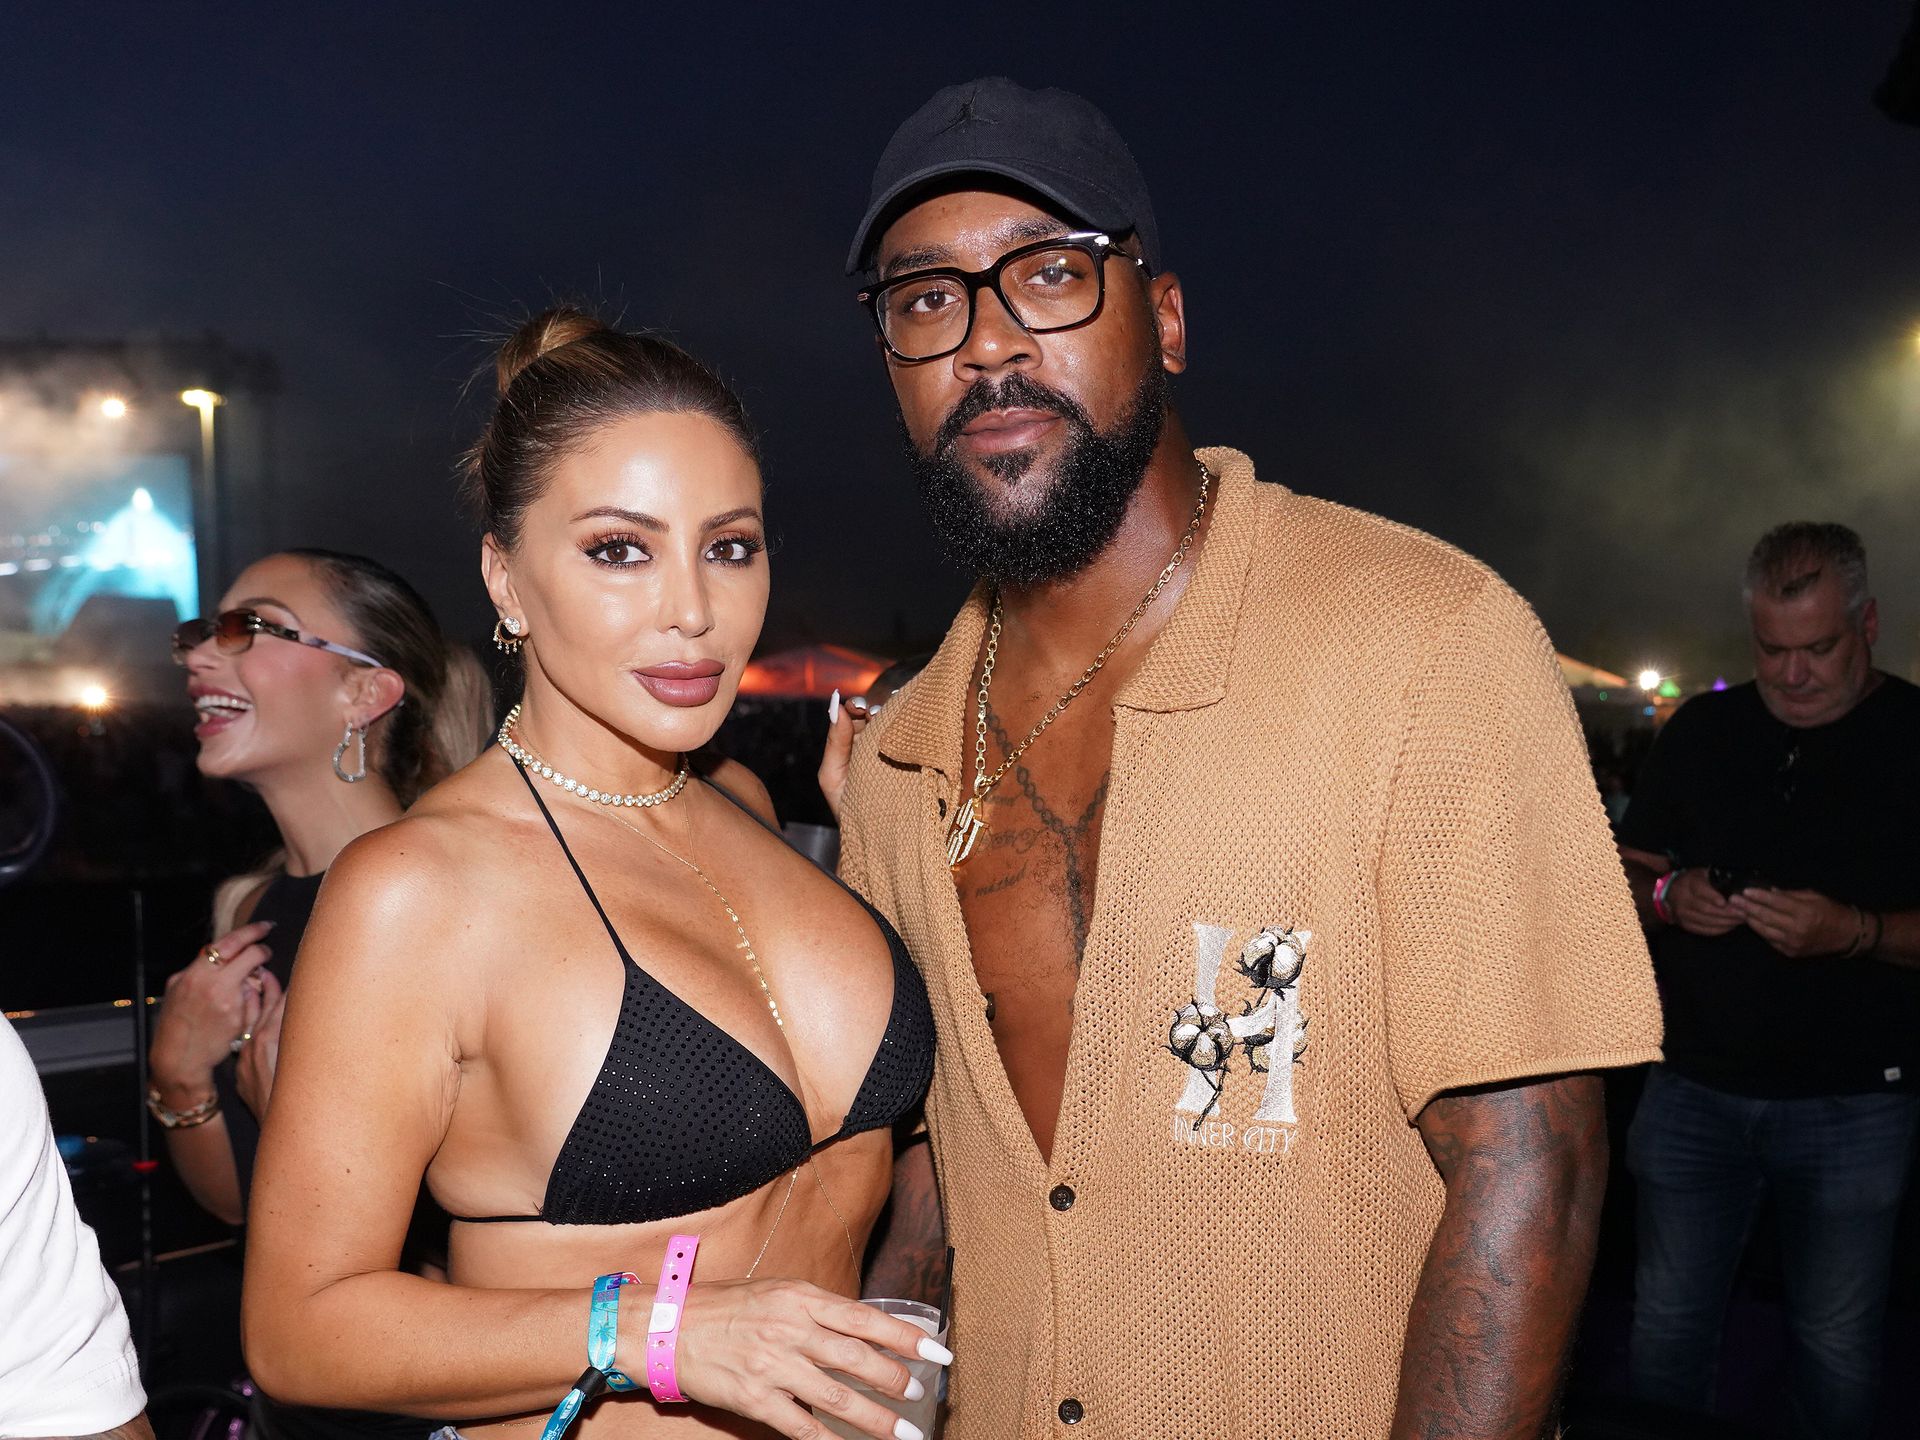 Exclusive Insight Larsa Pippen &amp Marcus Jordan's Upcoming Wedding Plans and Their Journey of Love